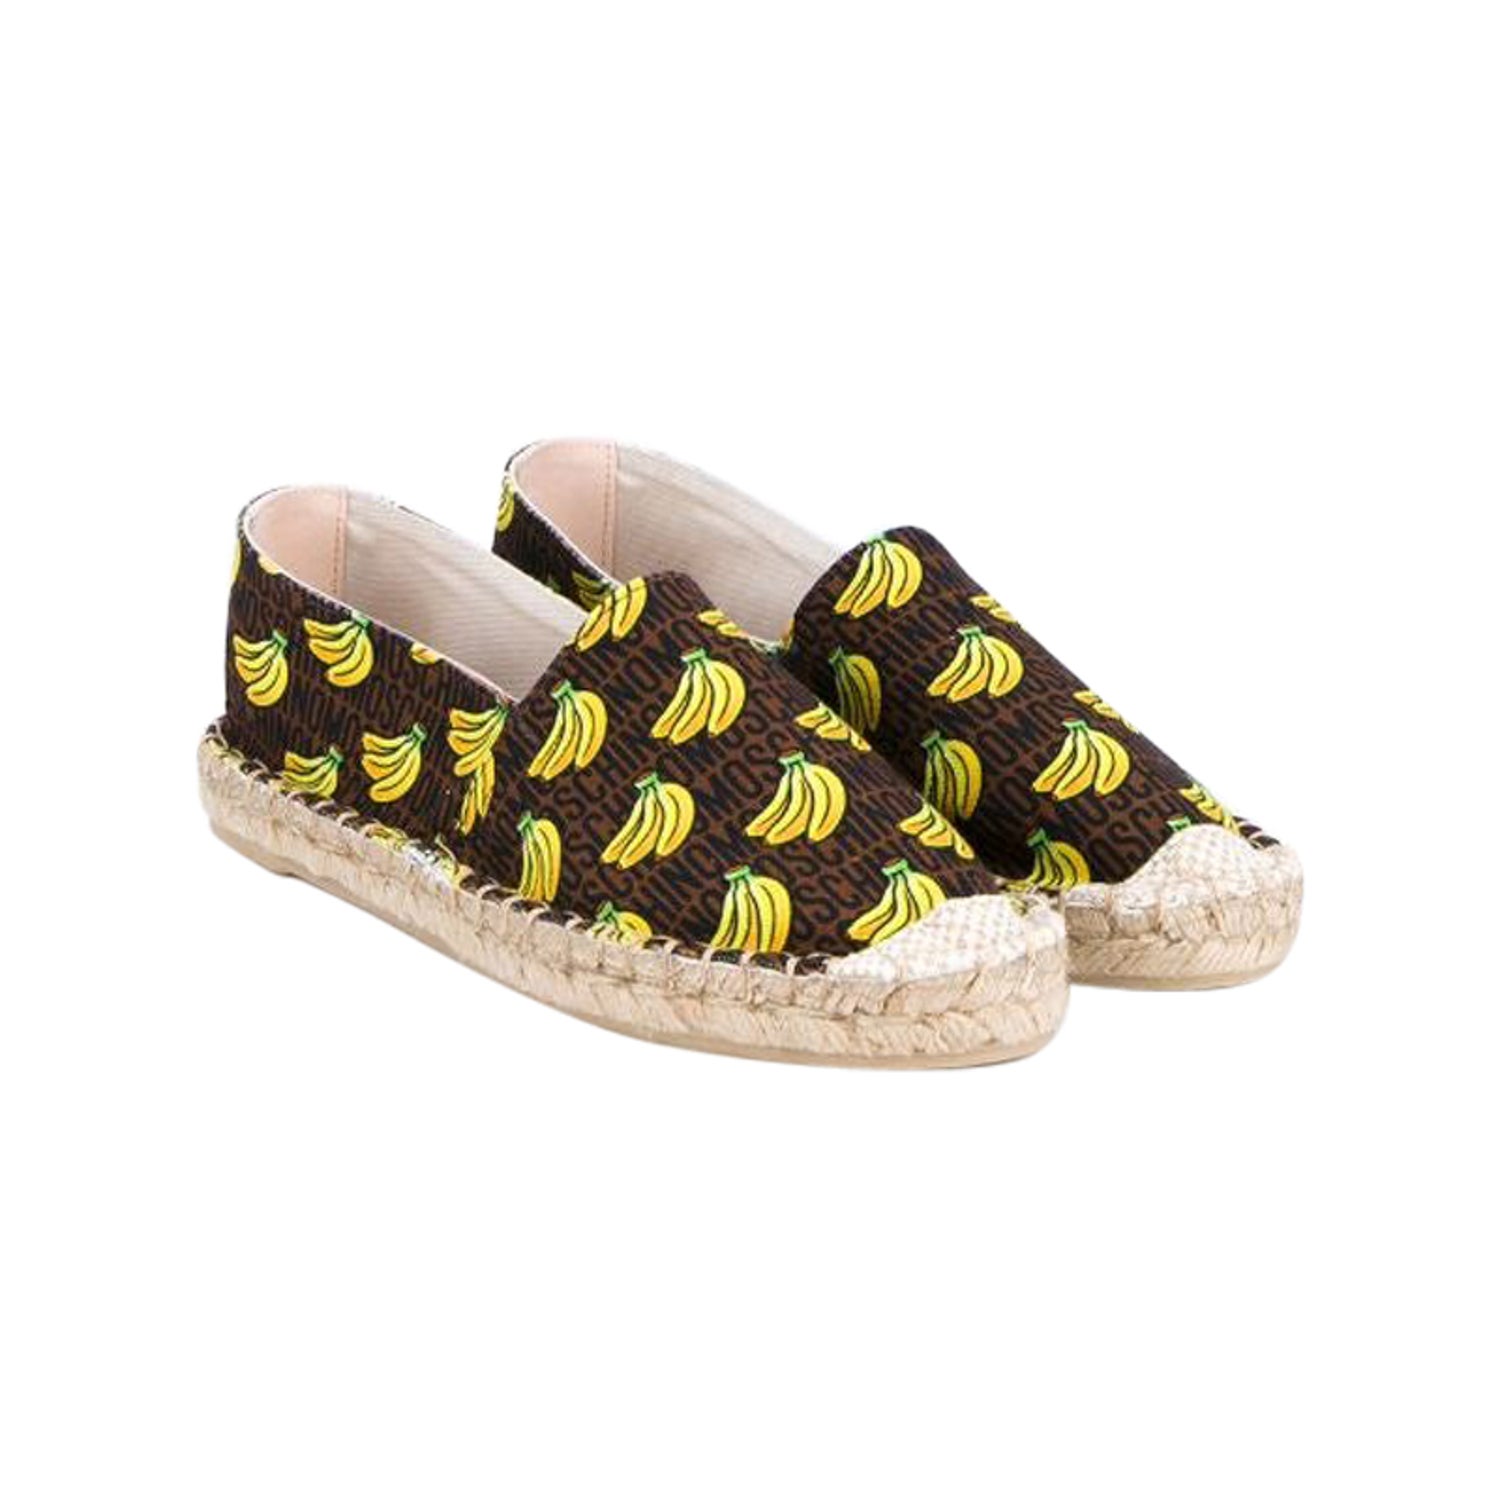 SS16 Moschino Couture Jeremy Scott Super Mario Banana Bunch Espadrilles US 8  For Sale at 1stDibs